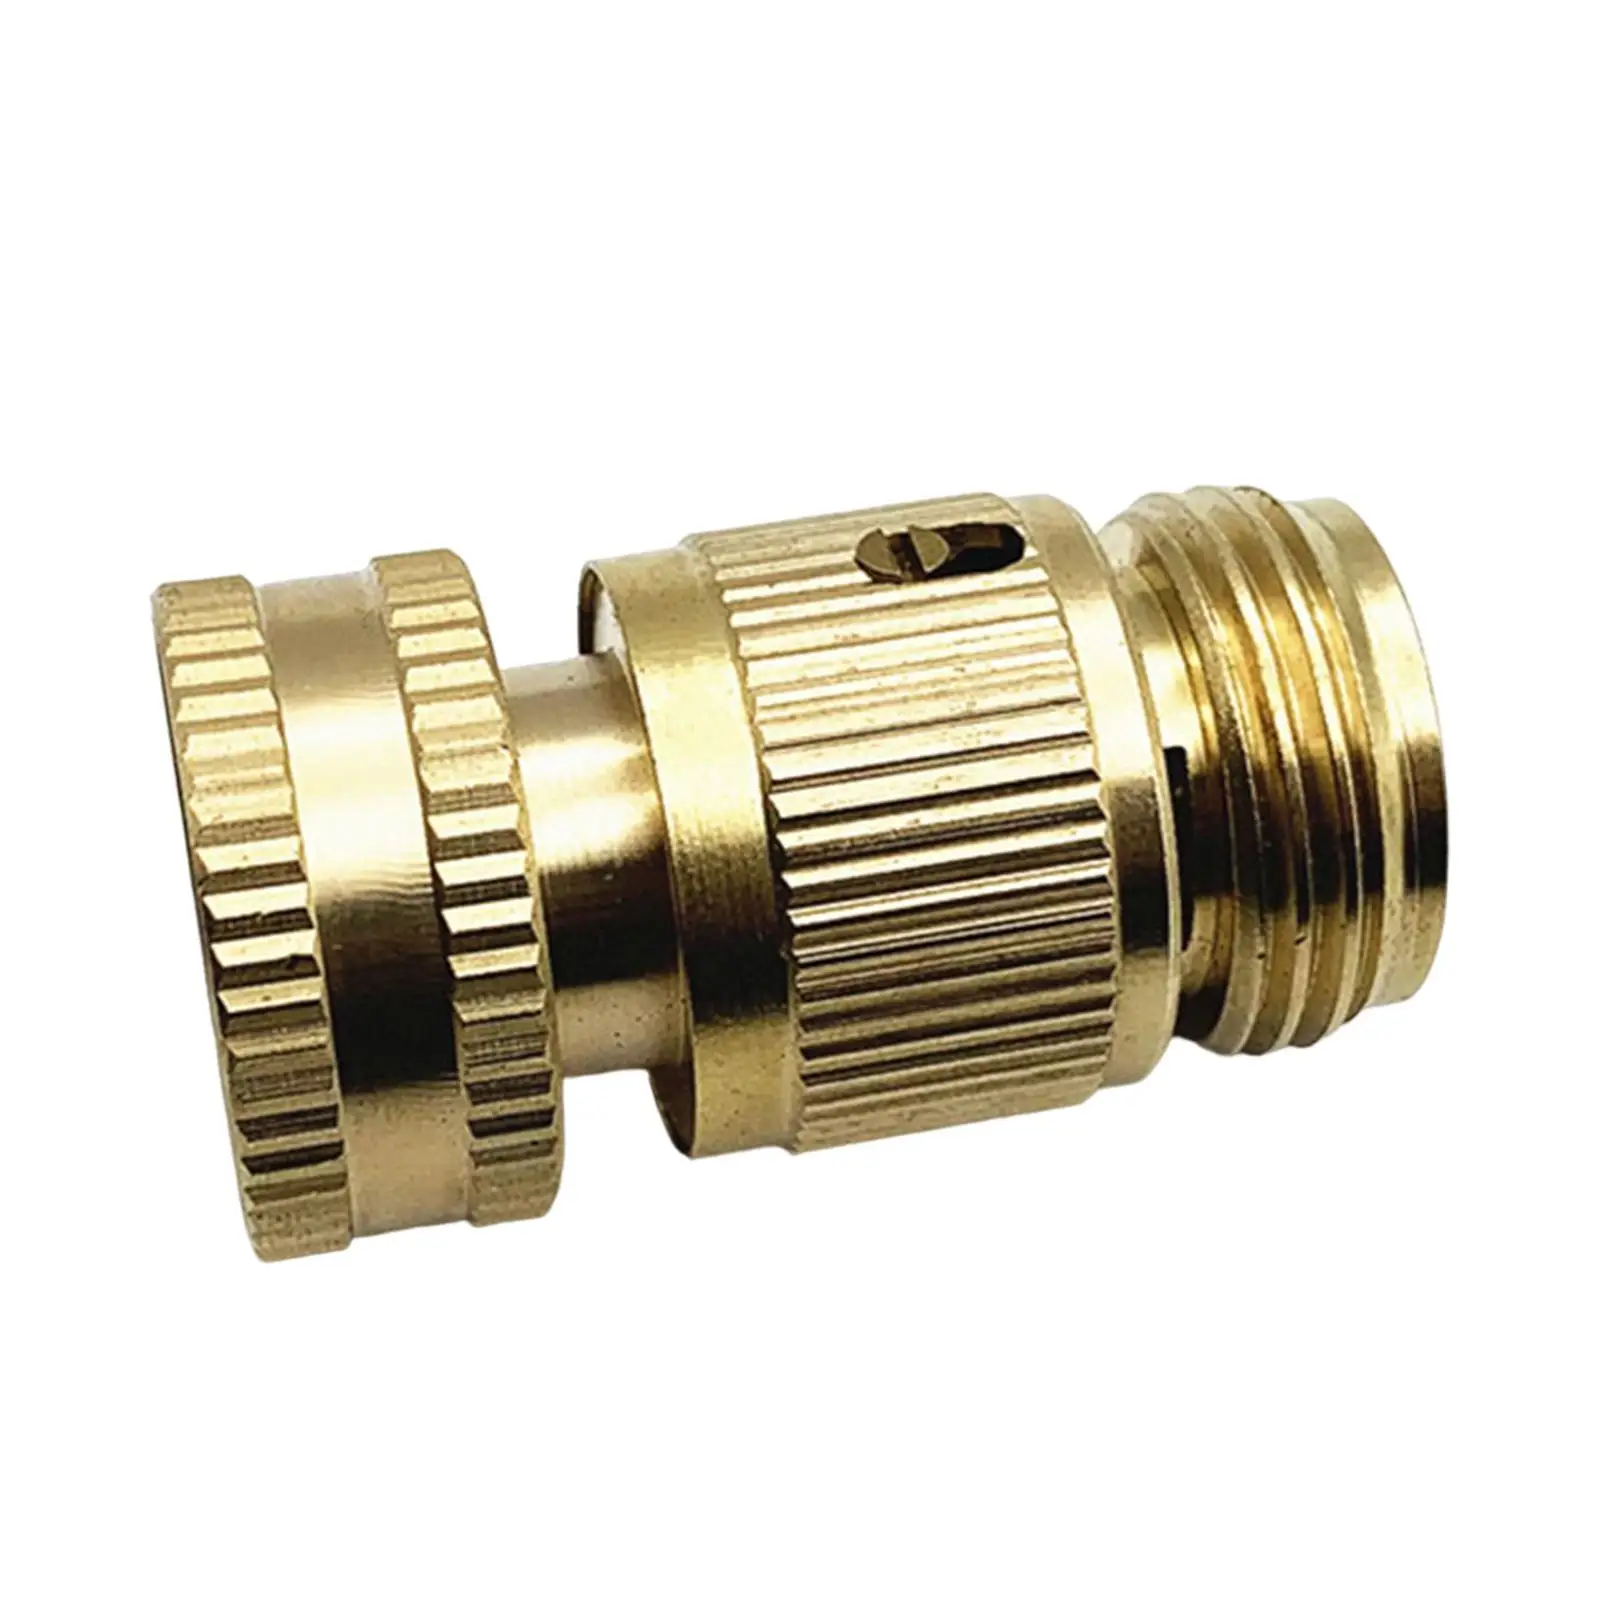 Brass Garden Hose Connector Pressure Washer Adapter 3/4 inch Water Hose Pipe Fitting for Watering Device Garden Hose